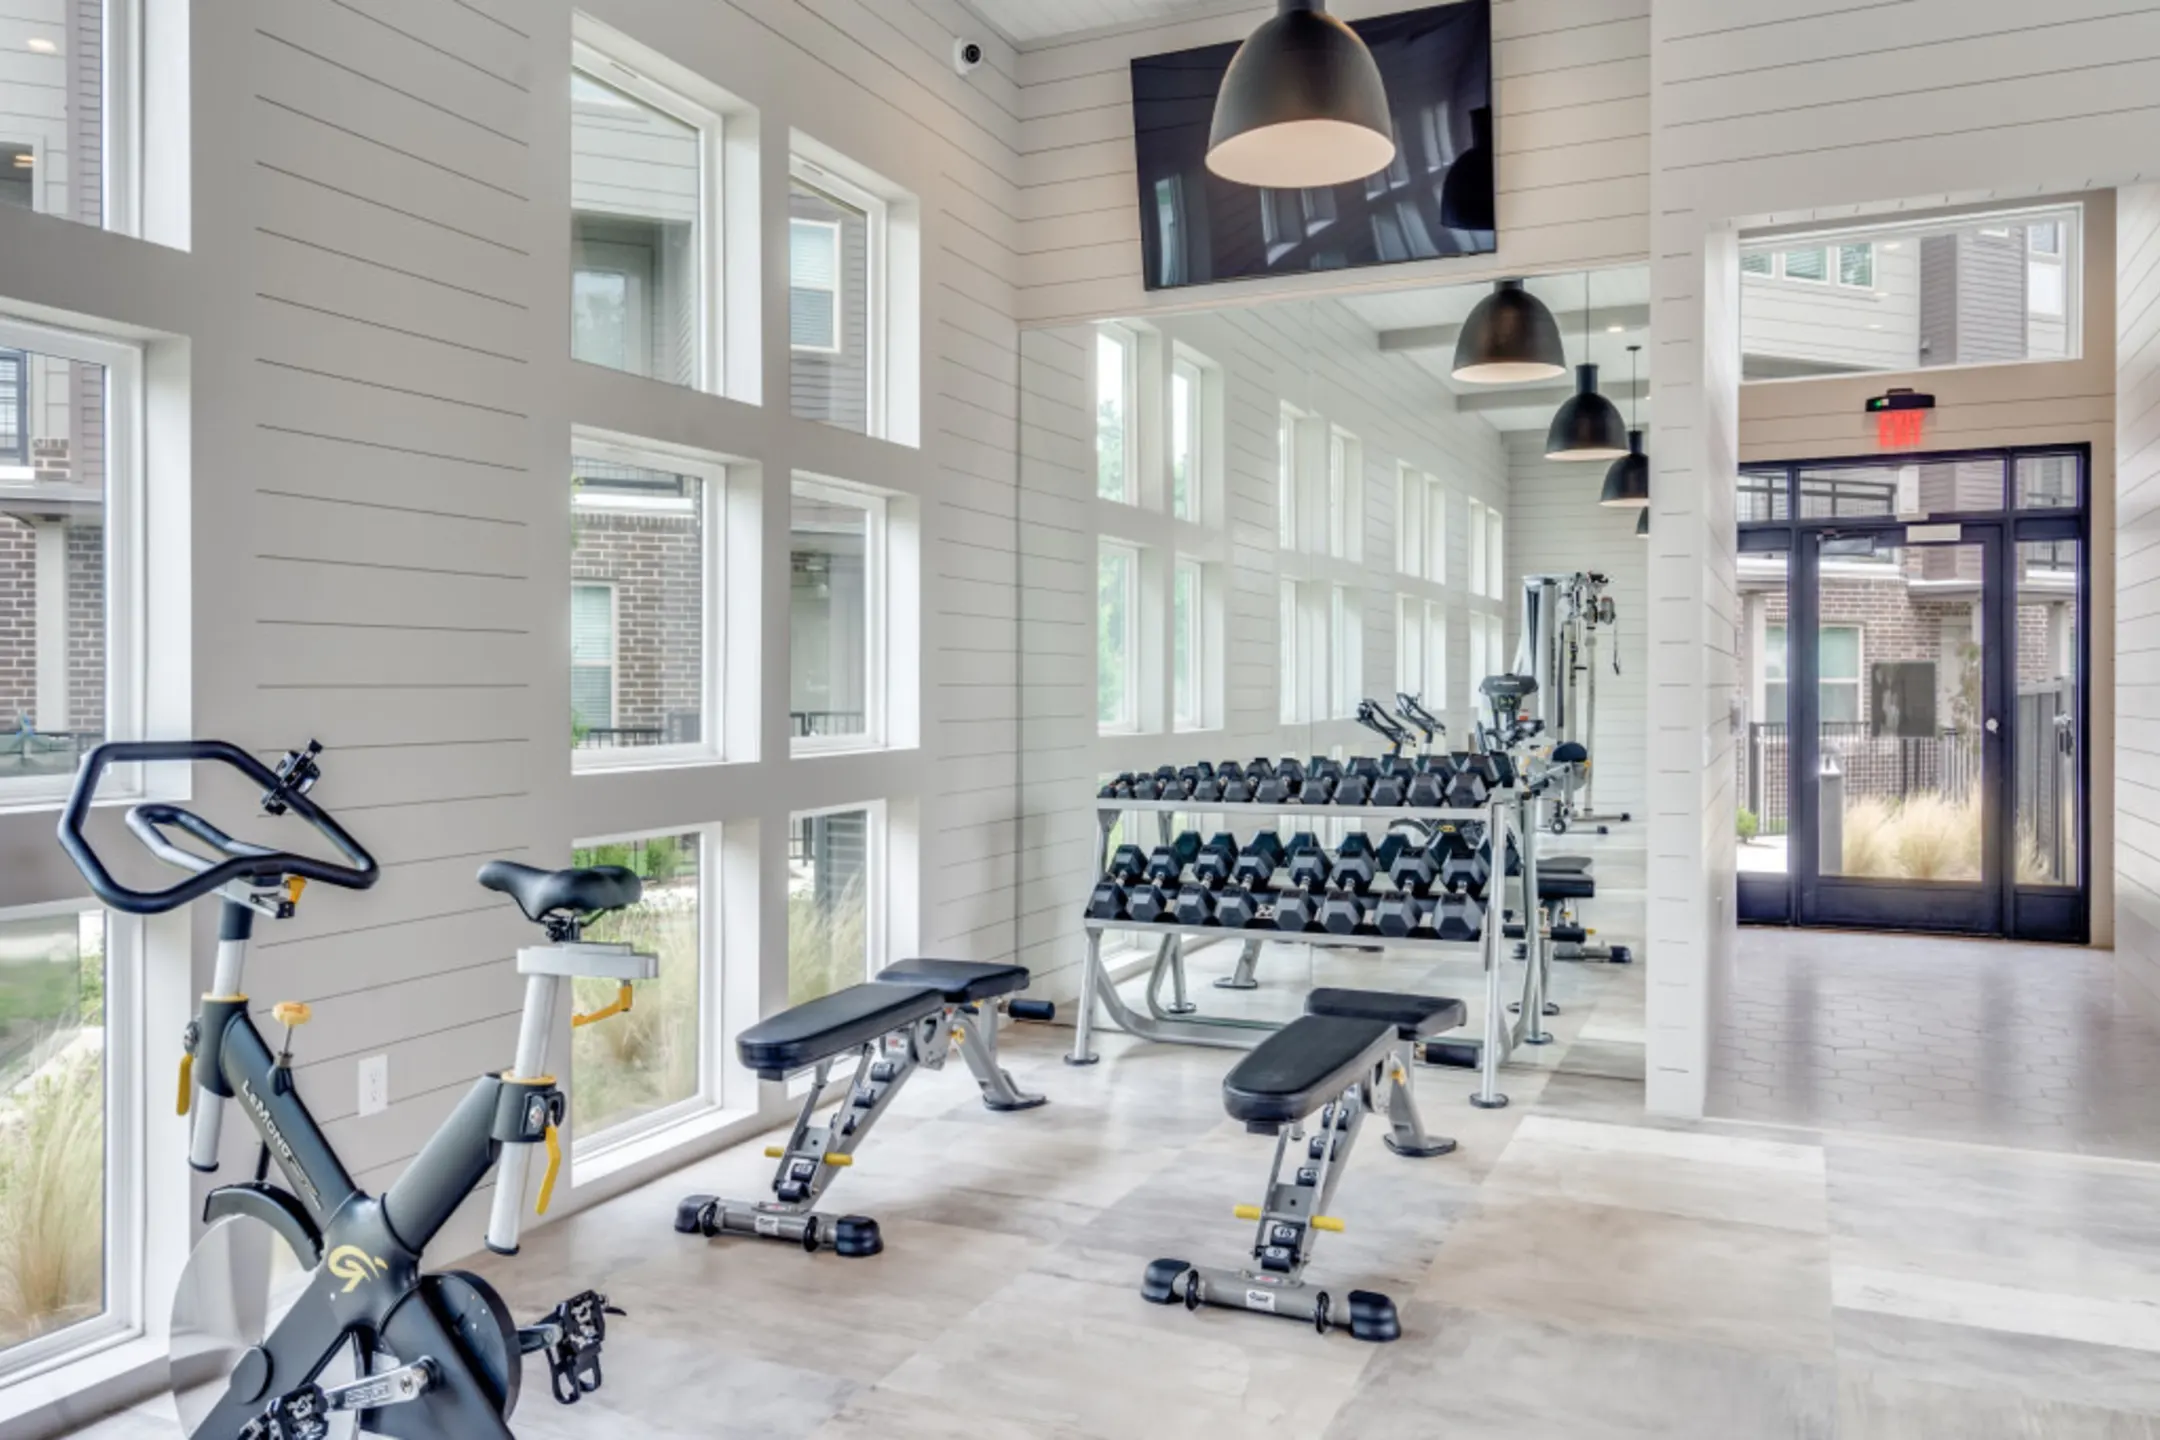 Fitness Weight Room - Midway Row House - Farmers Branch, TX